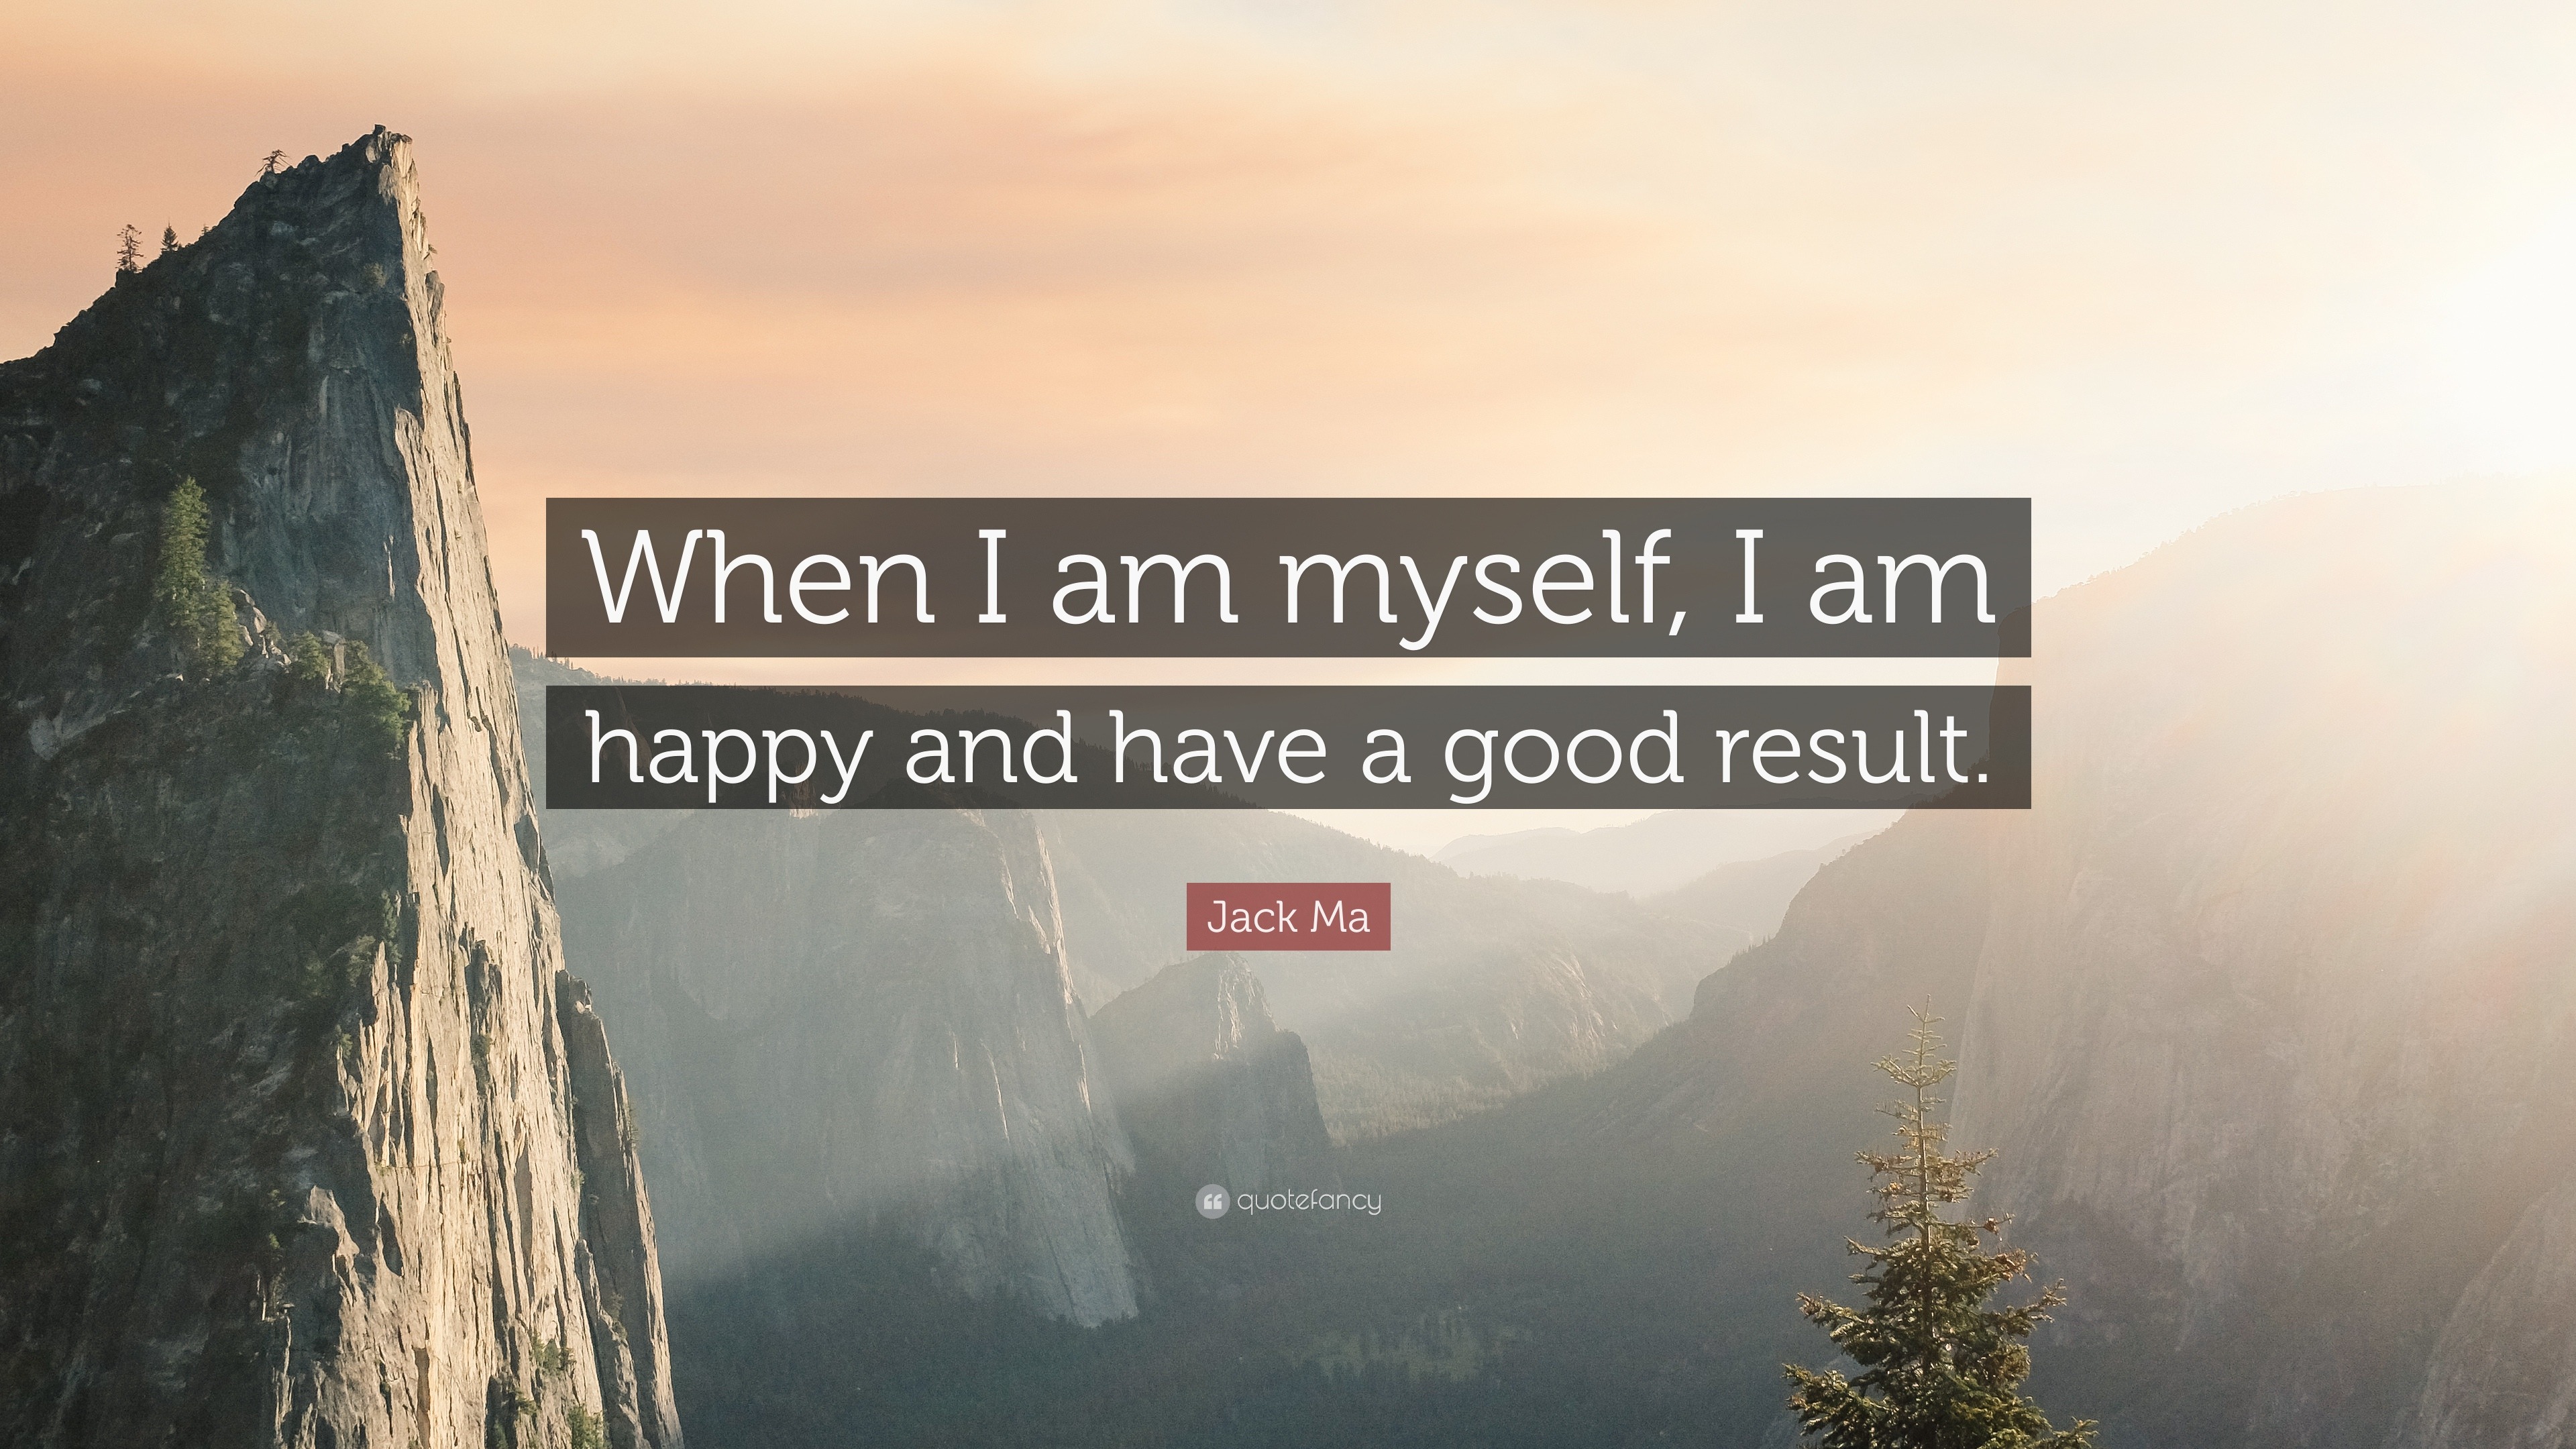 Jack Ma Quote When I Am Myself I Am Happy And Have A Good Result